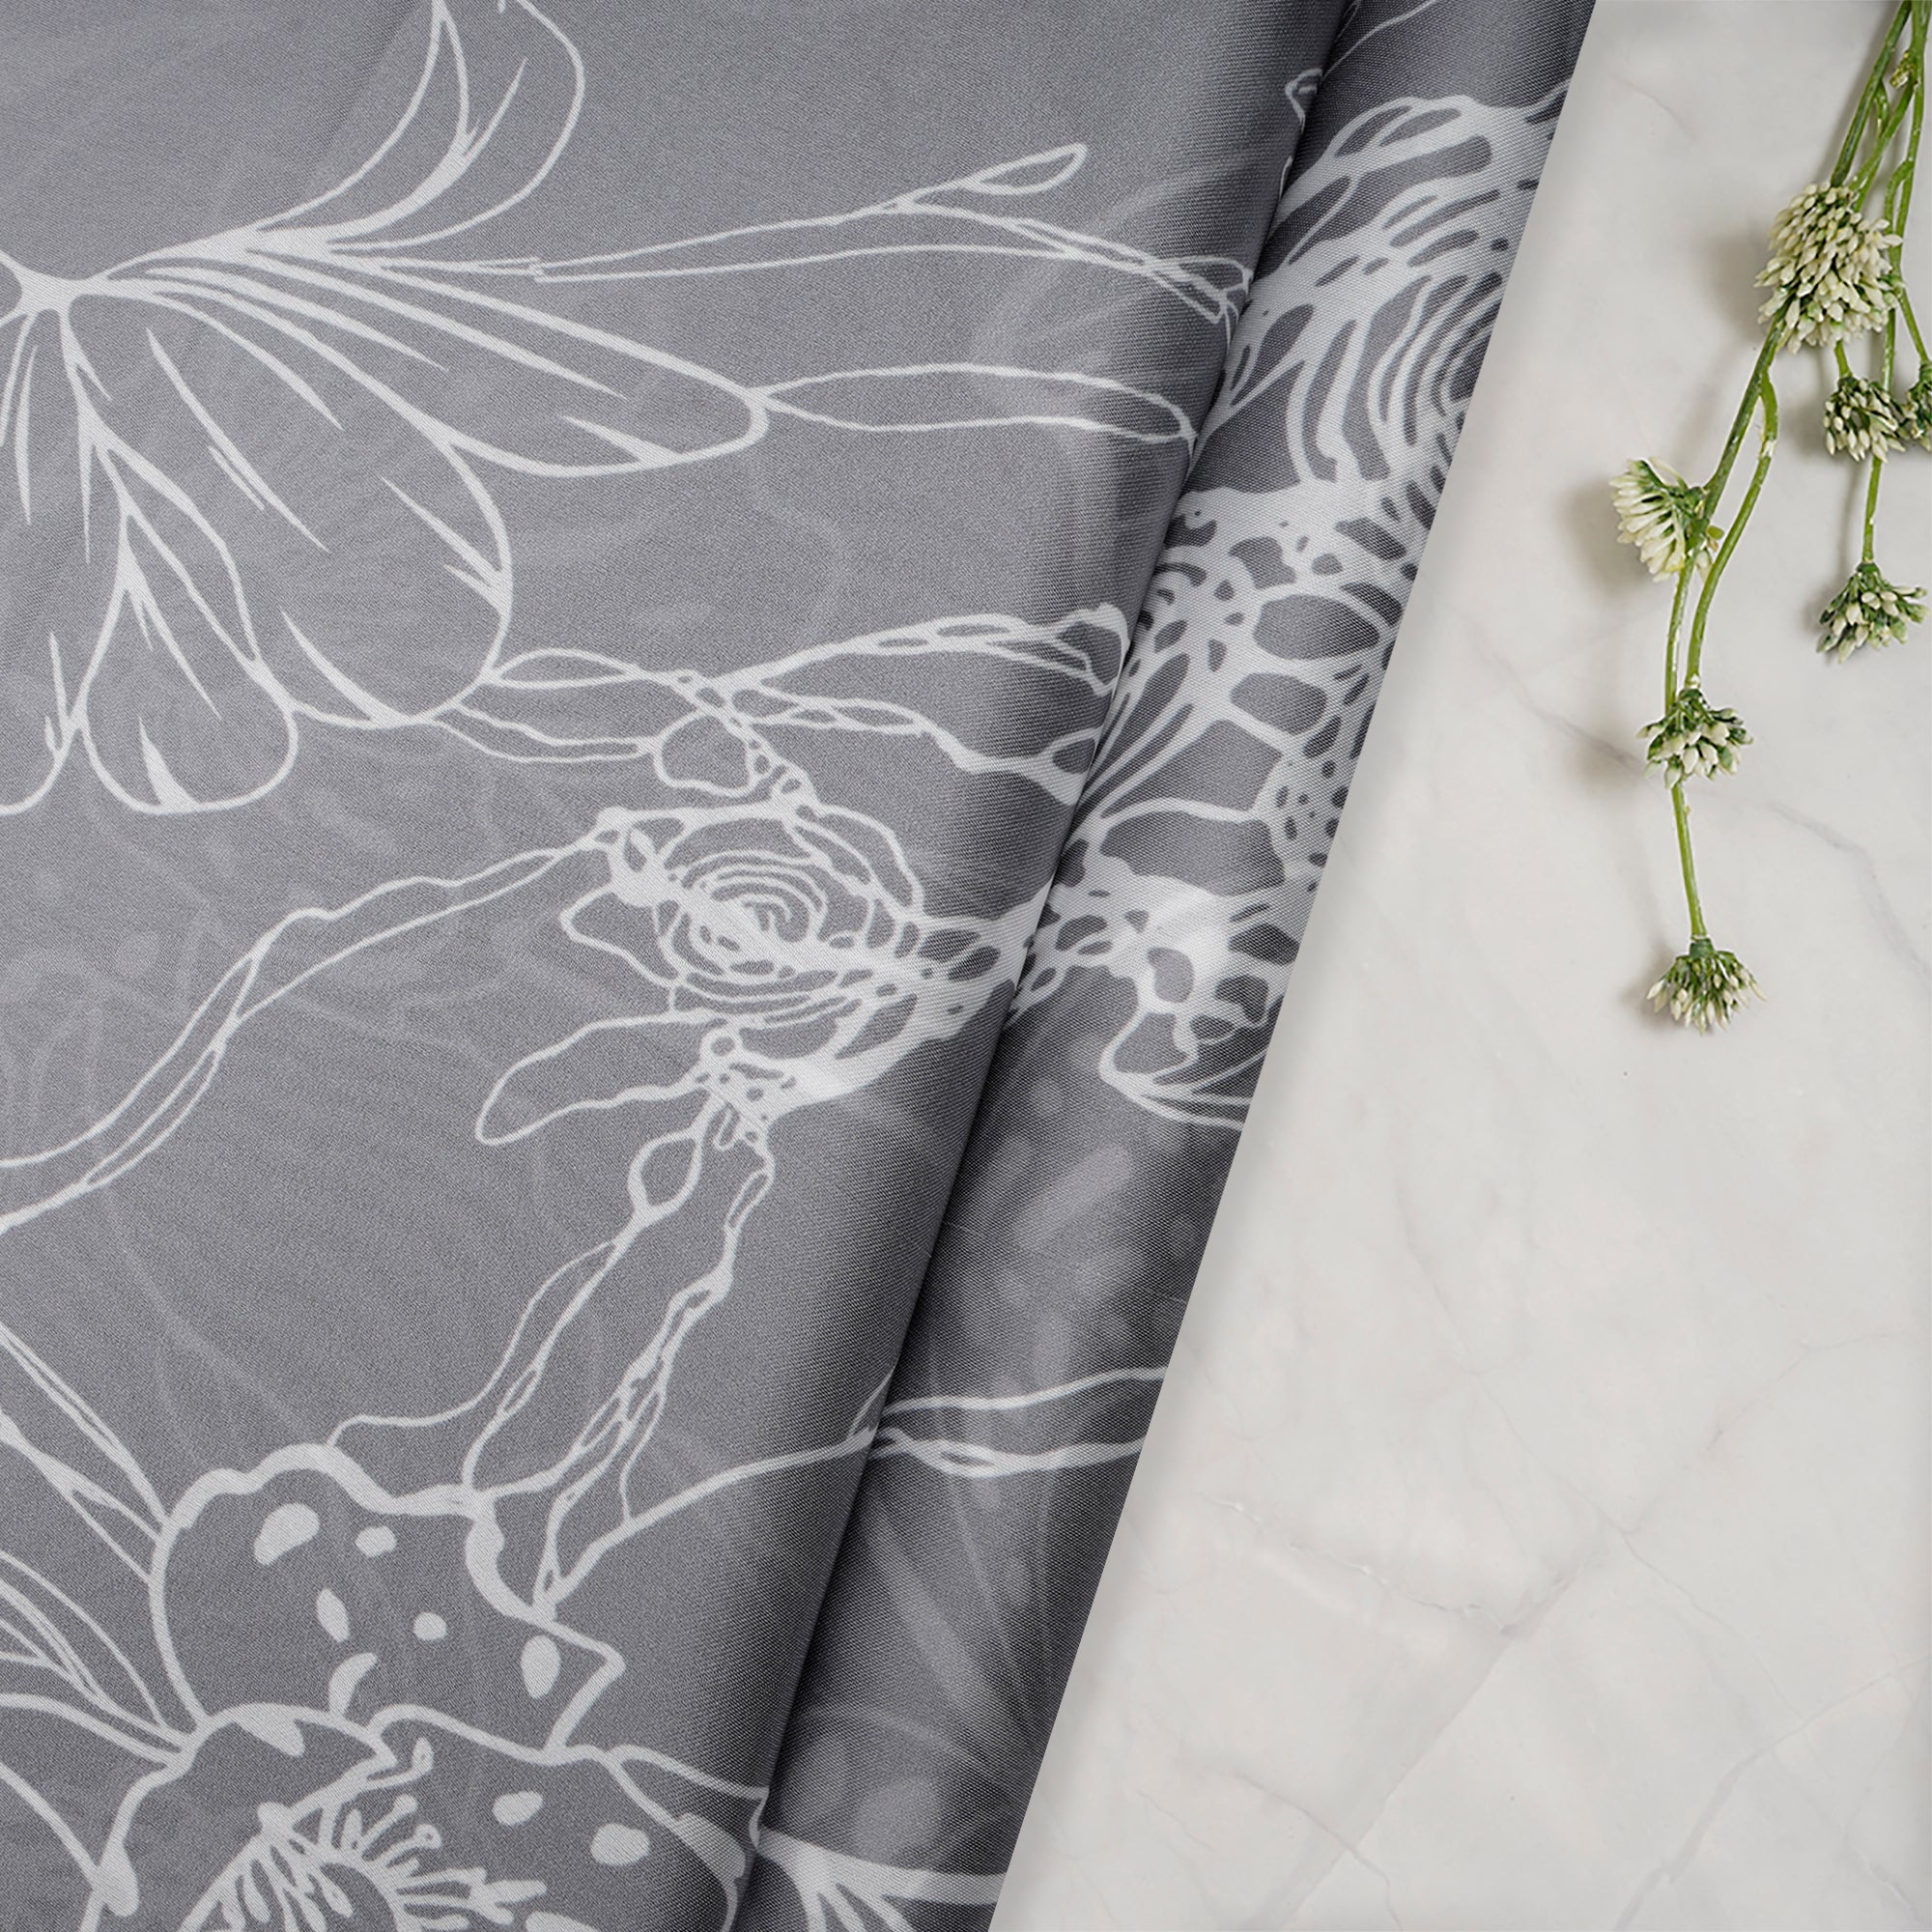 Gray-White Floral Pattern Digital Printed Georgette Satin Fabric